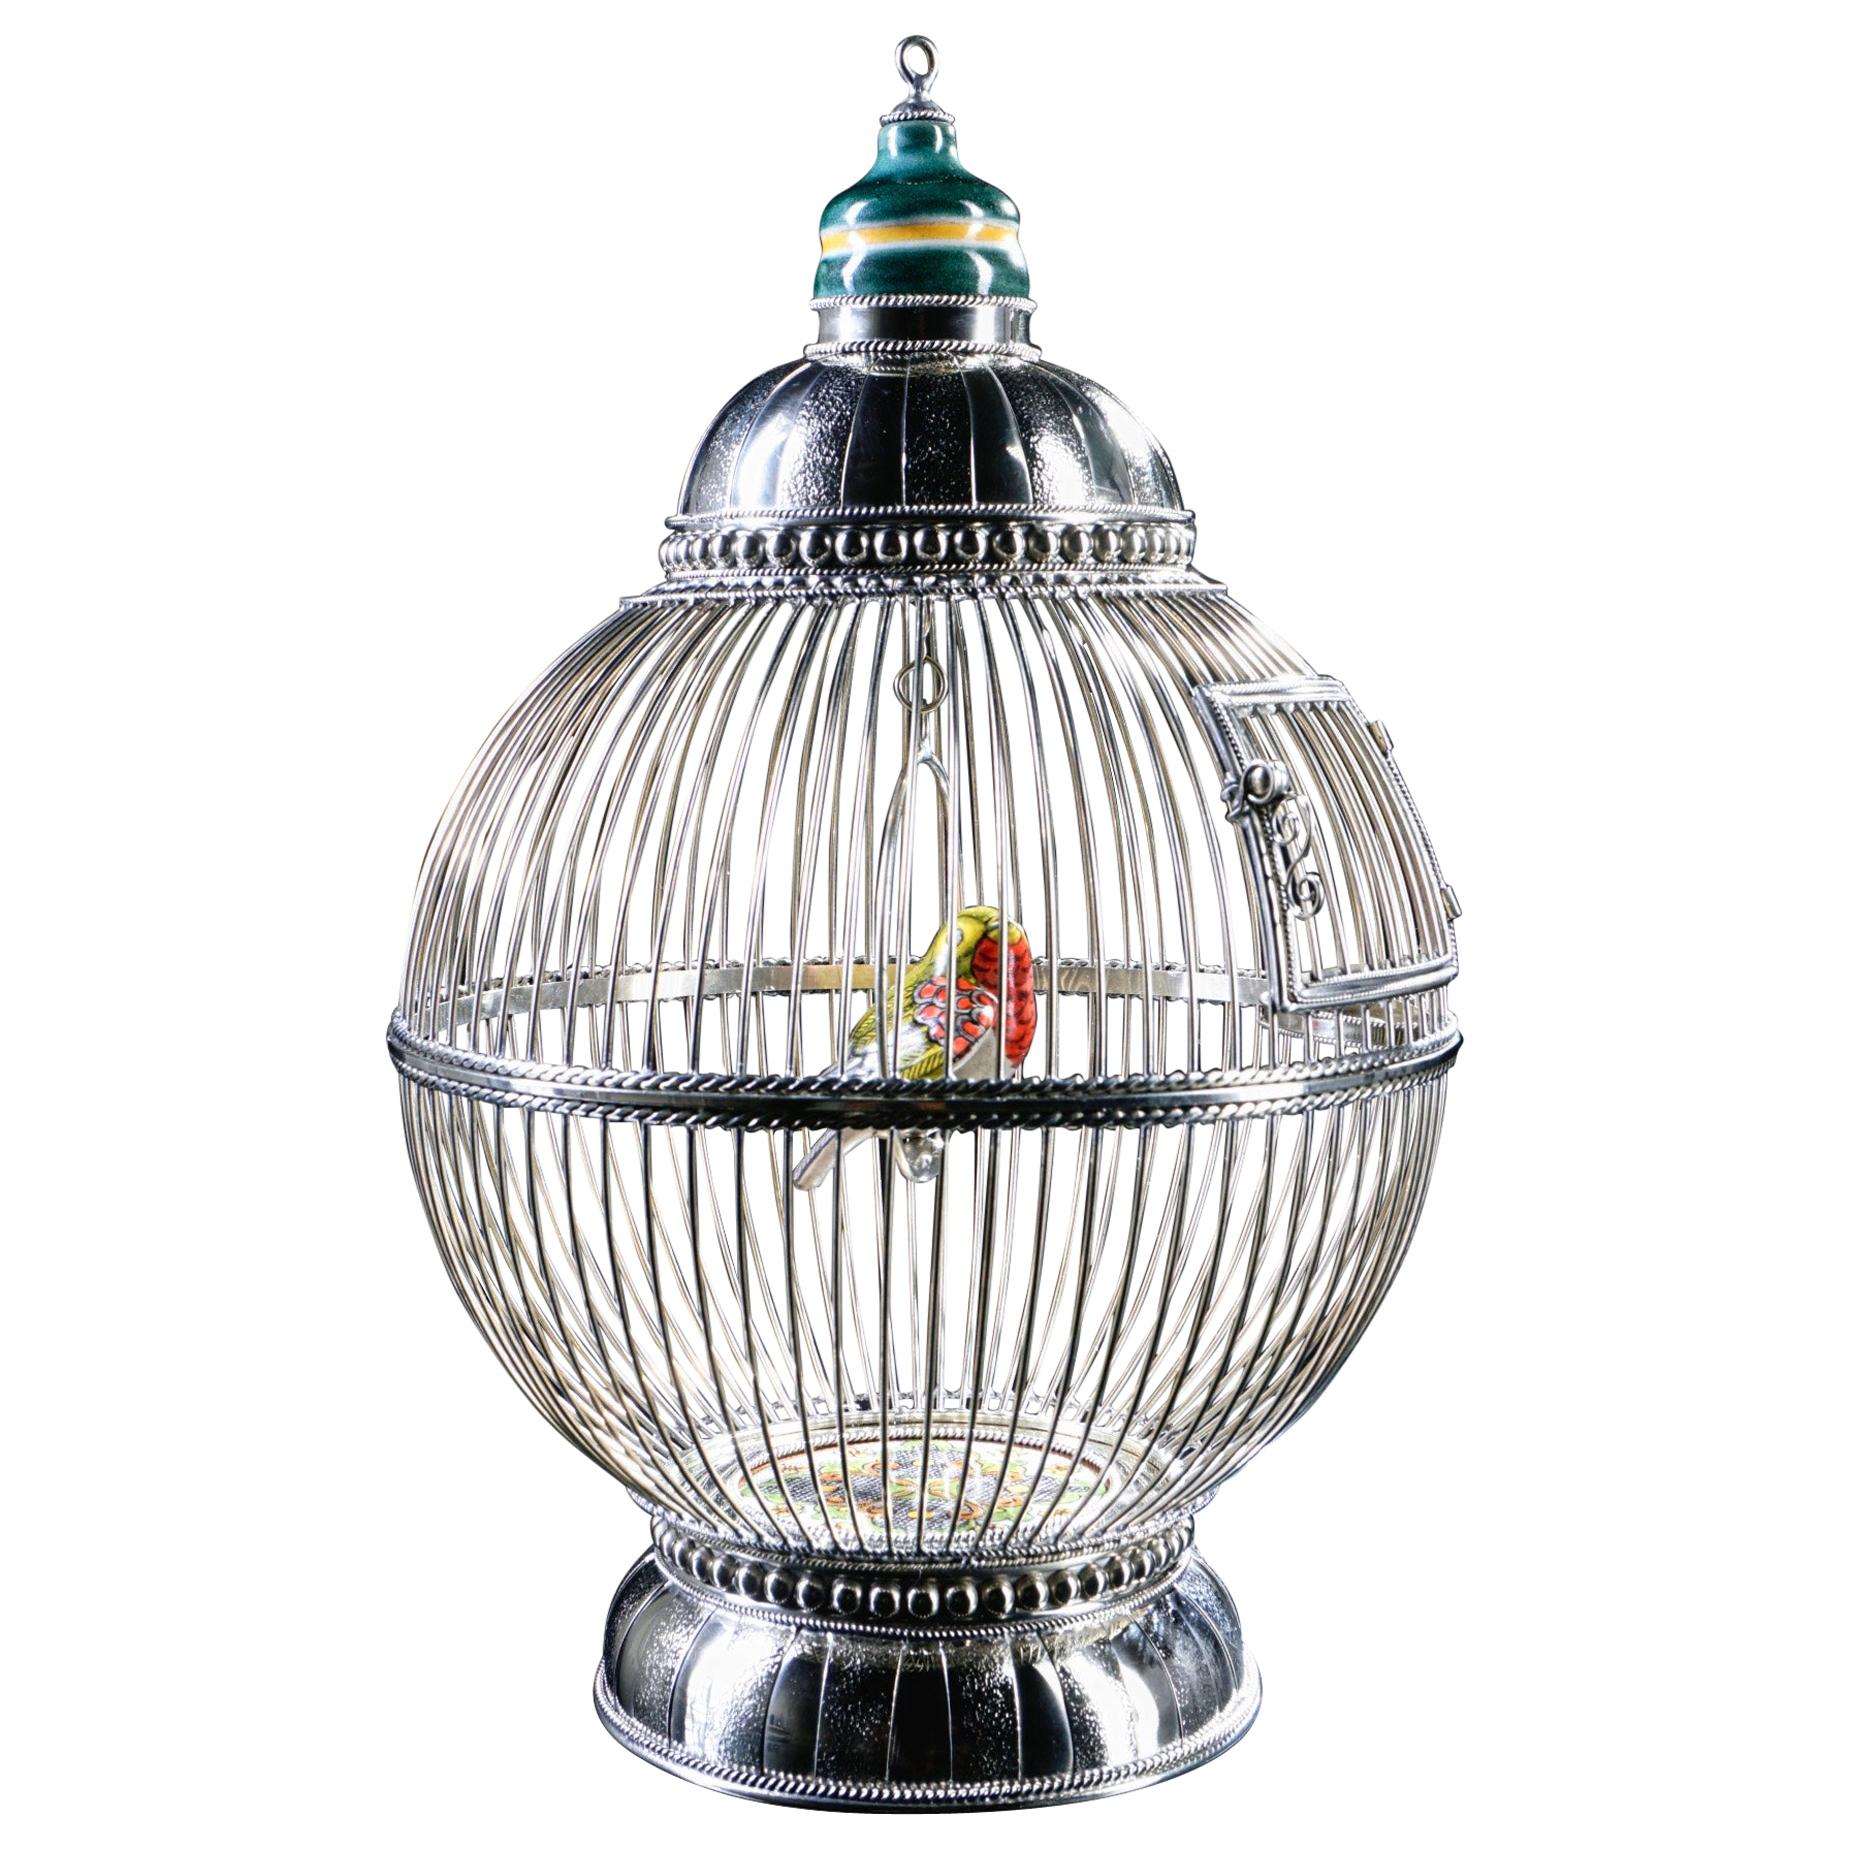 White Metal Cage with Ceramic Birds, One of a Kind